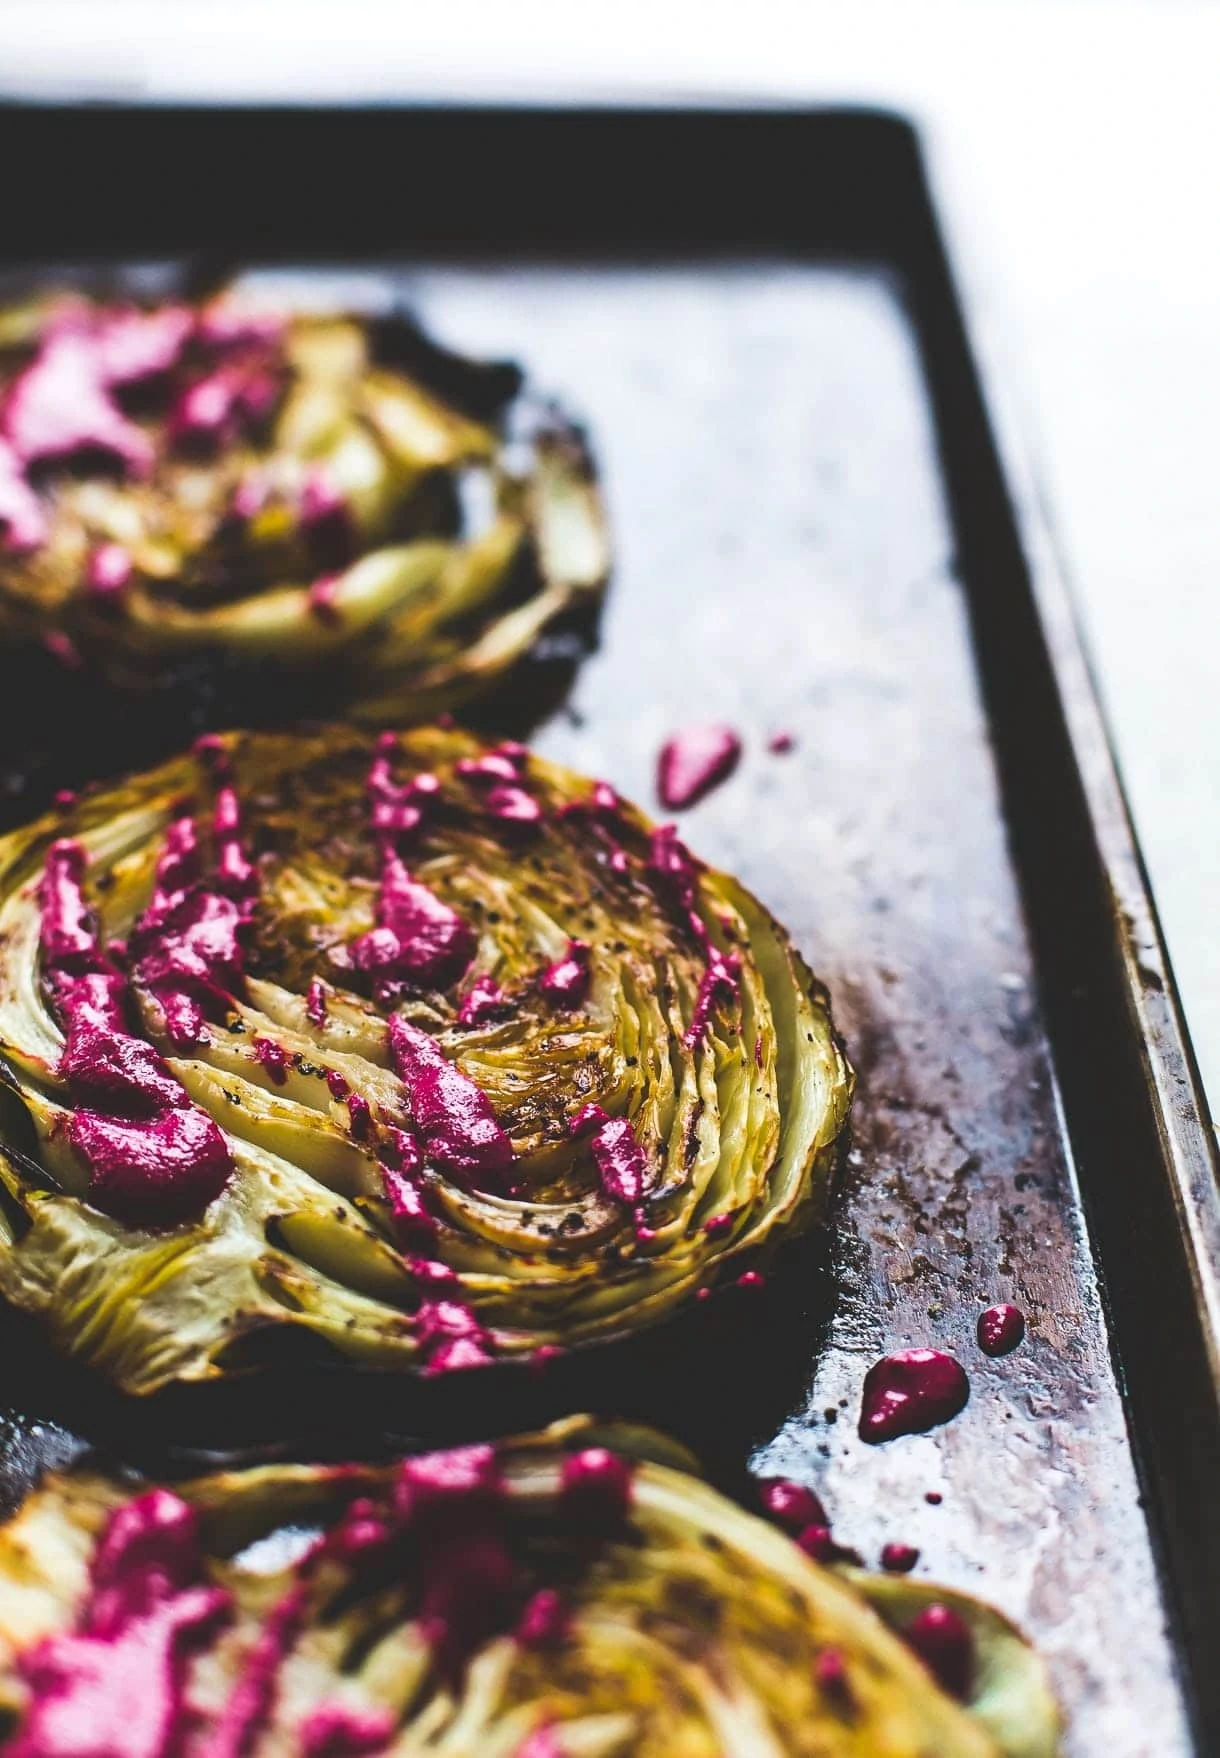 Roasted Cabbage Steaks with Garlicky Beet Sauce / roasted cabbage wedges / vegetarian recipe